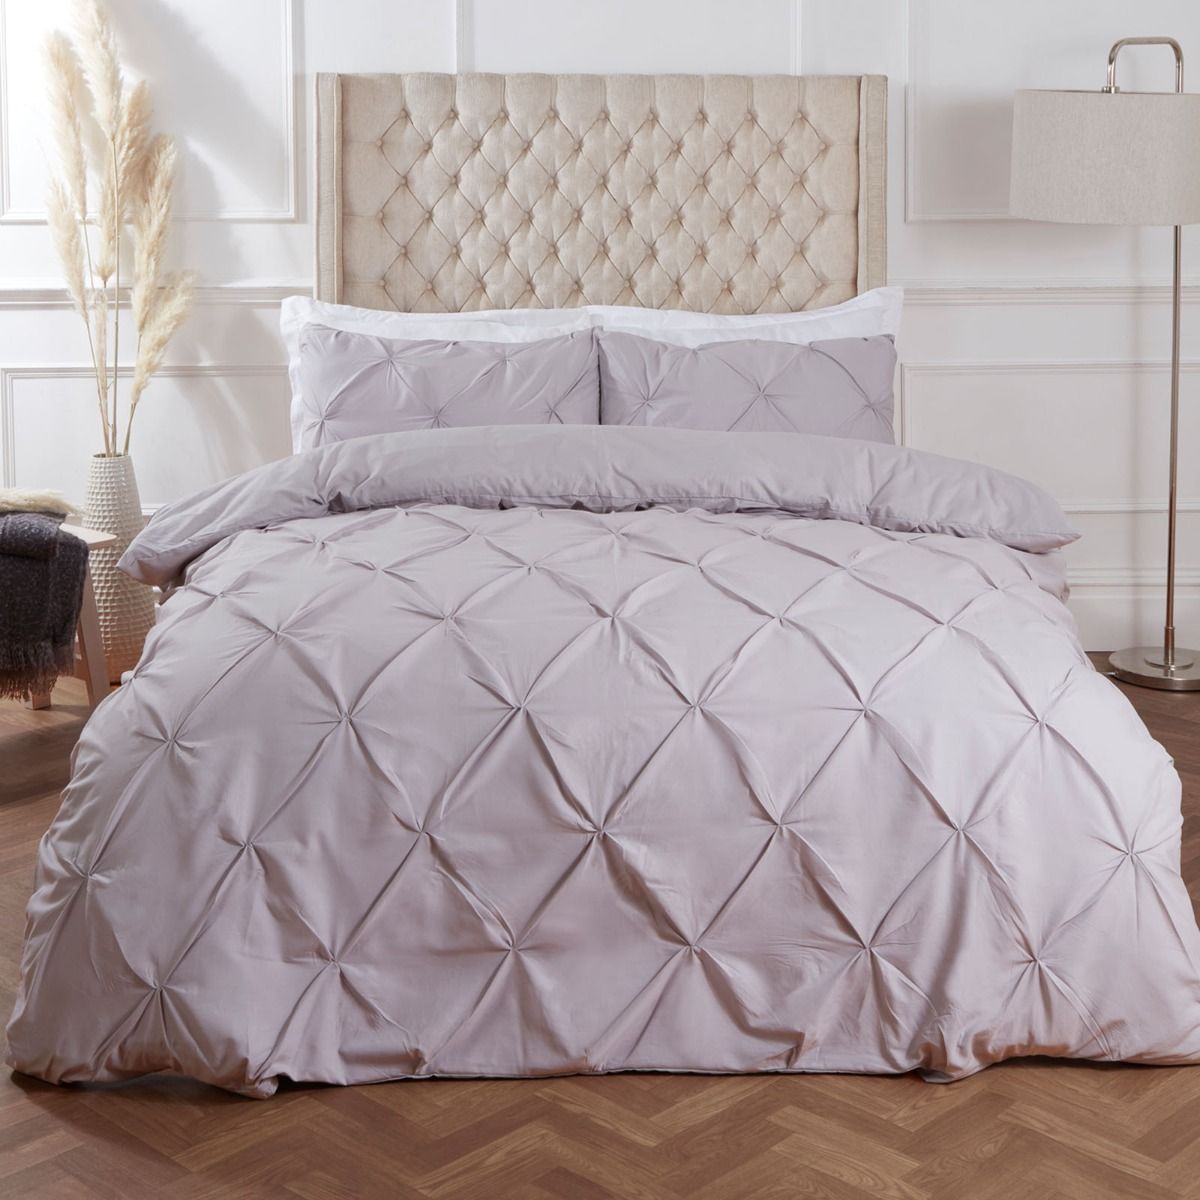 NEW Silver Grey Luxury Modern Pin Tuck Bedding Bed Duvet Set All Sizes 